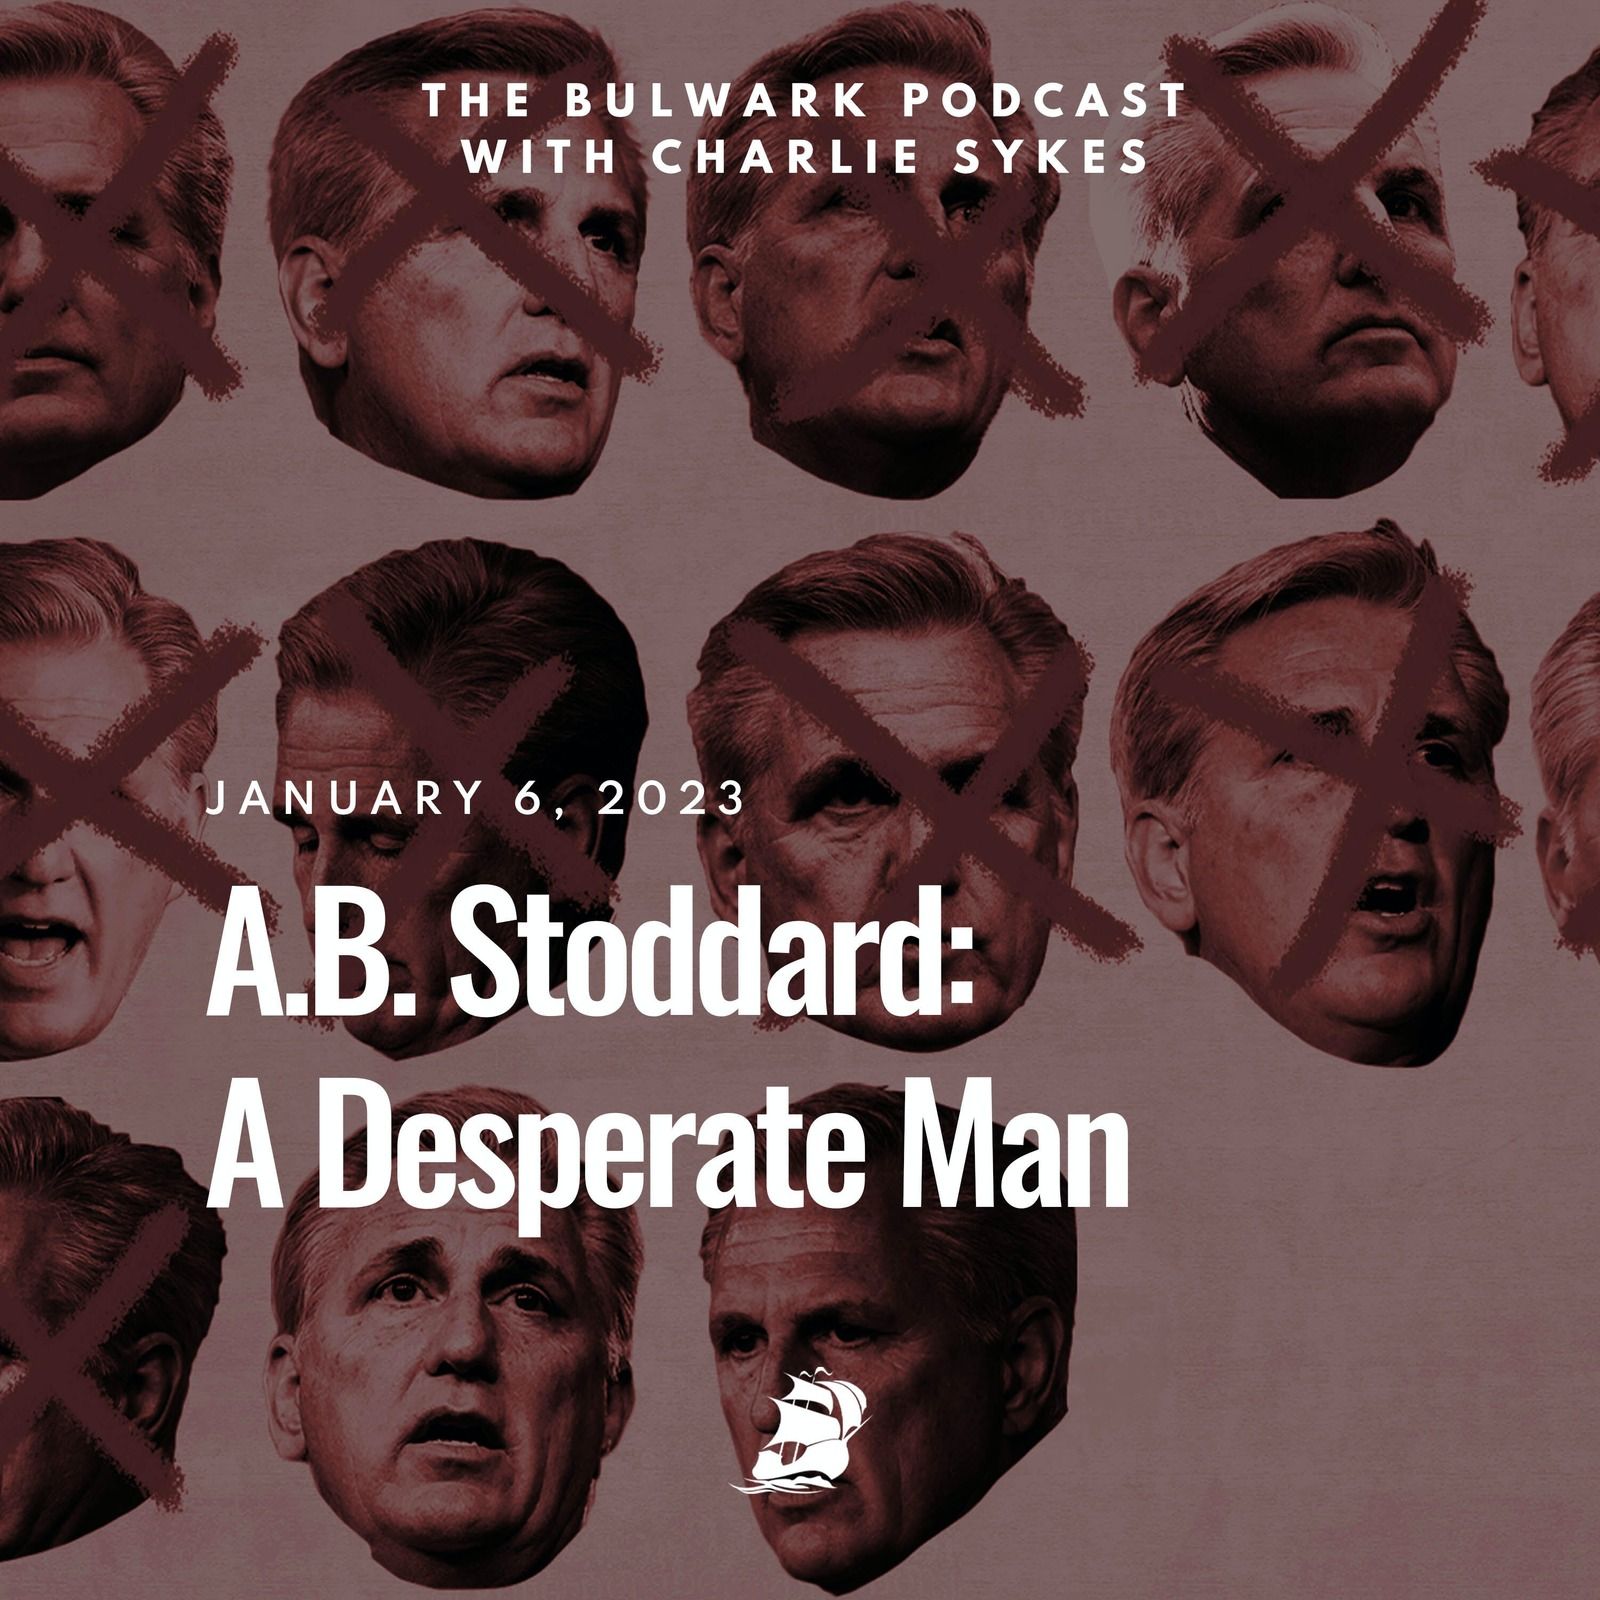 A.B. Stoddard: A Desperate Man by The Bulwark Podcast